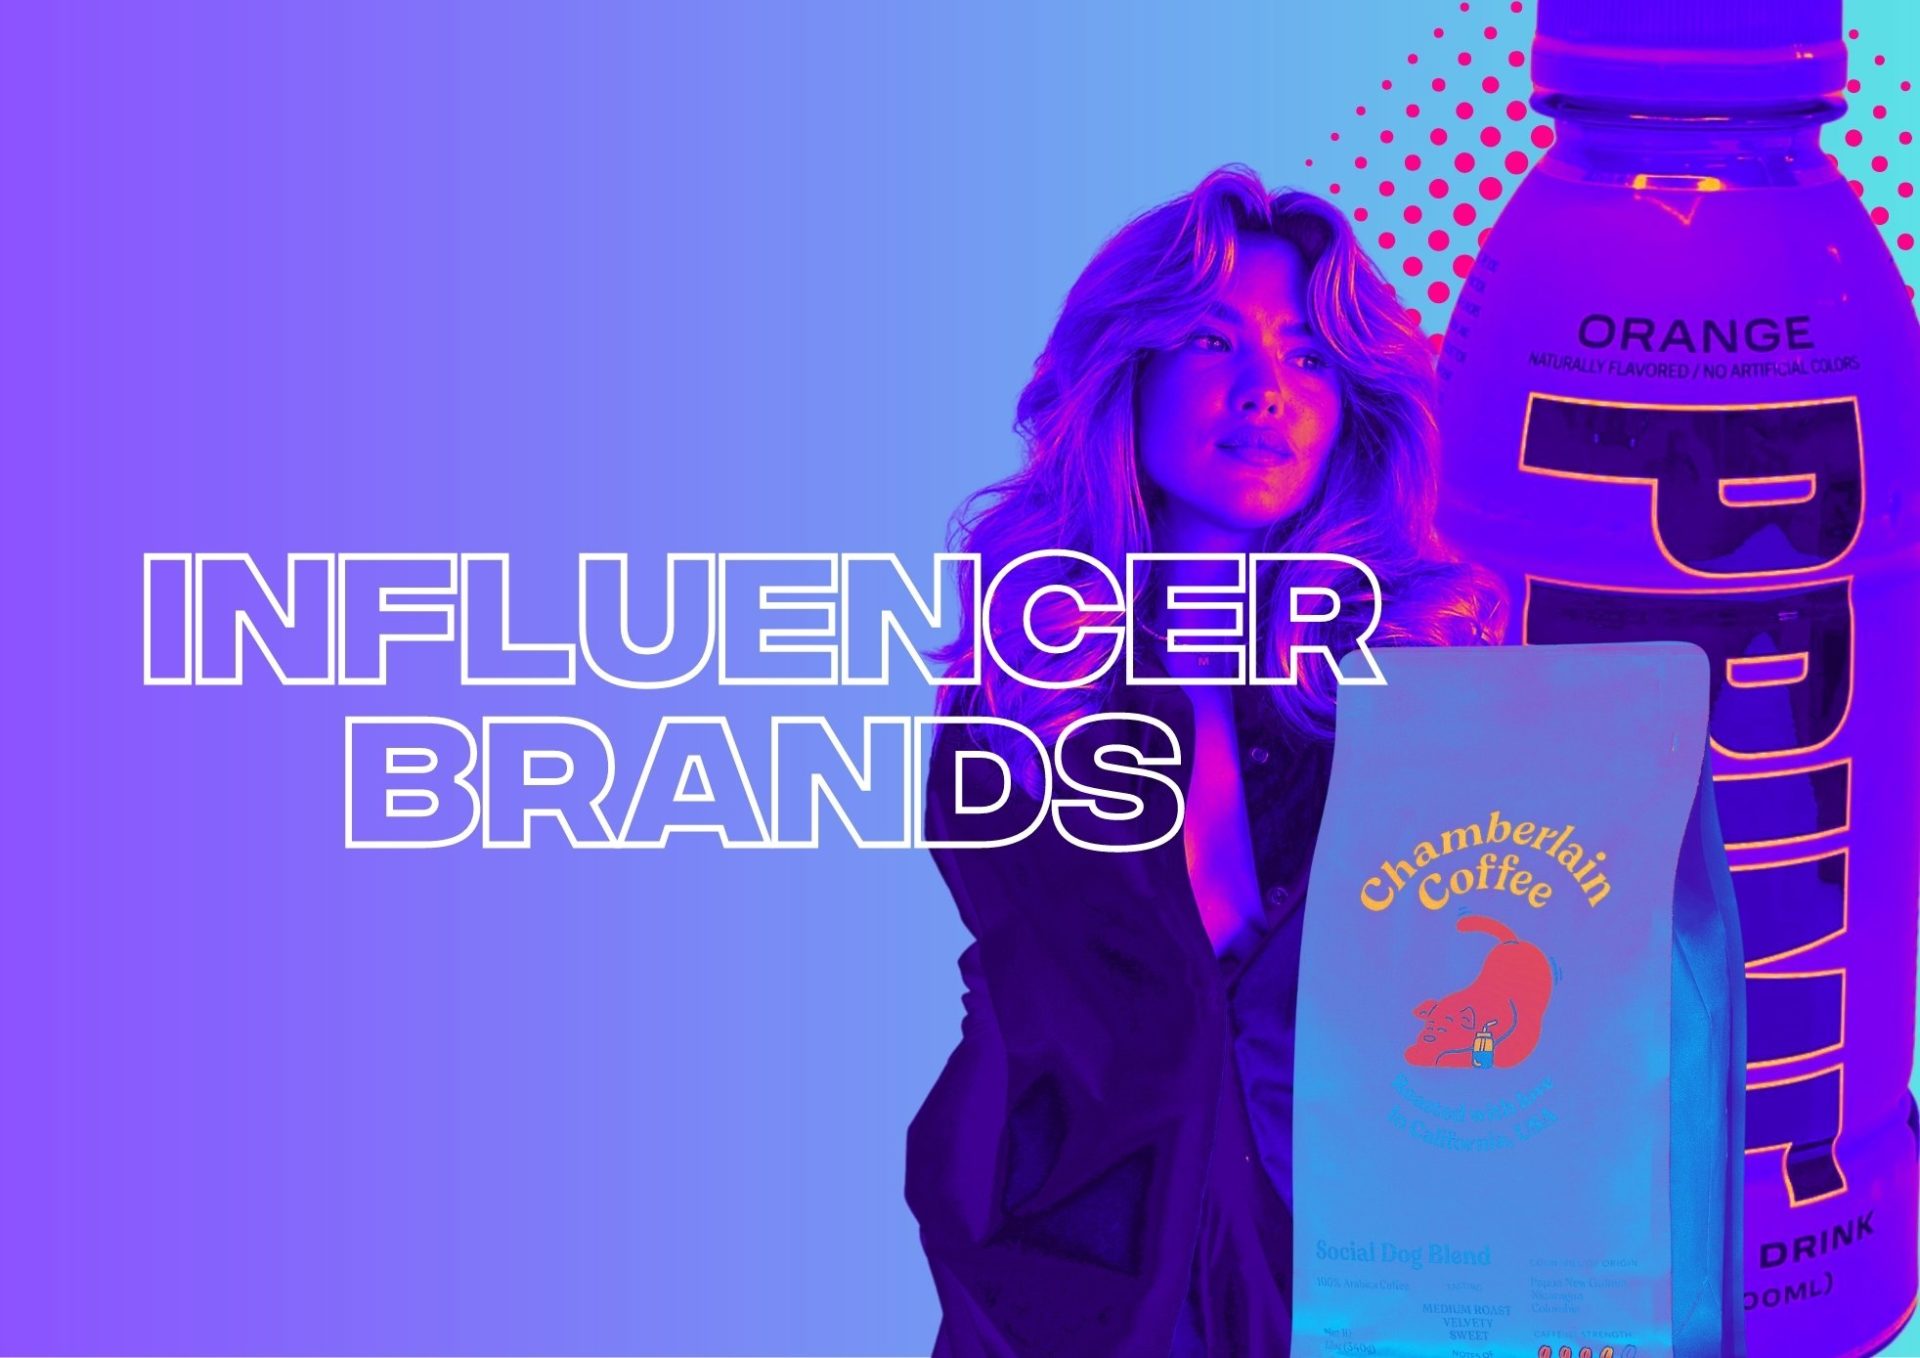 Influencer Brands are Your Toughest Competition